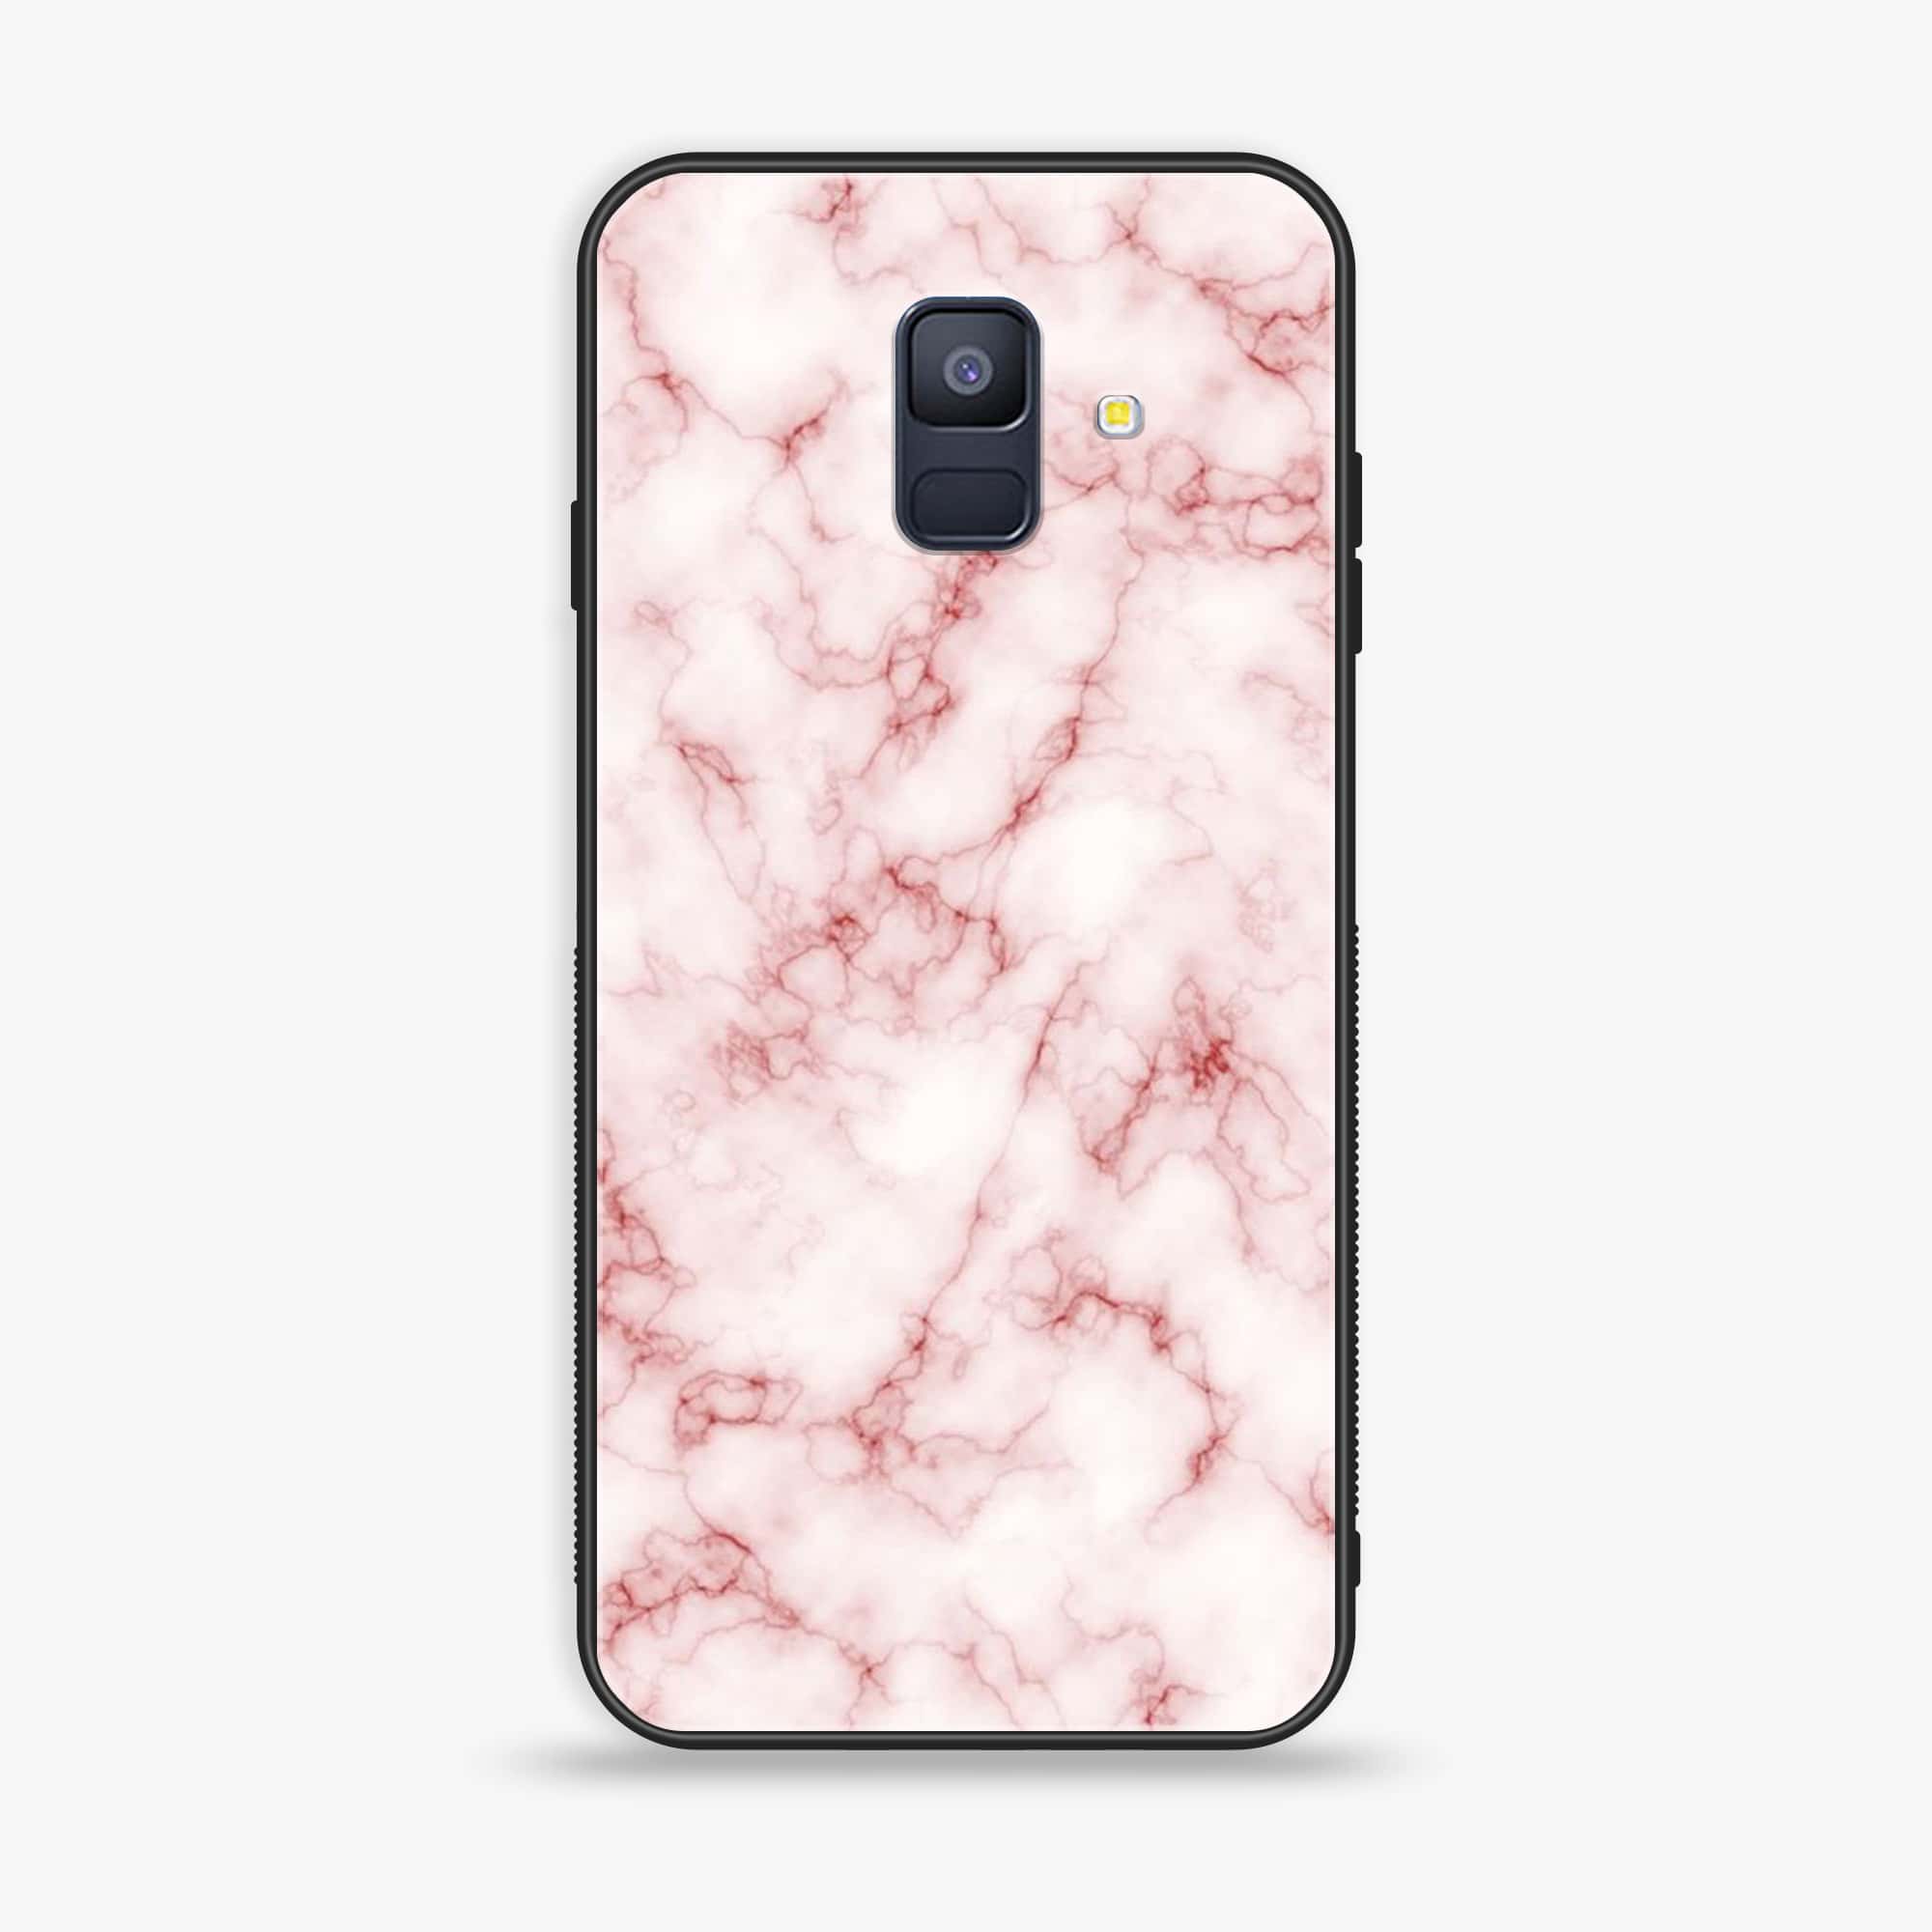 Samsung Galaxy A6 (2018) - Pink Marble Series - Premium Printed Glass soft Bumper shock Proof Case